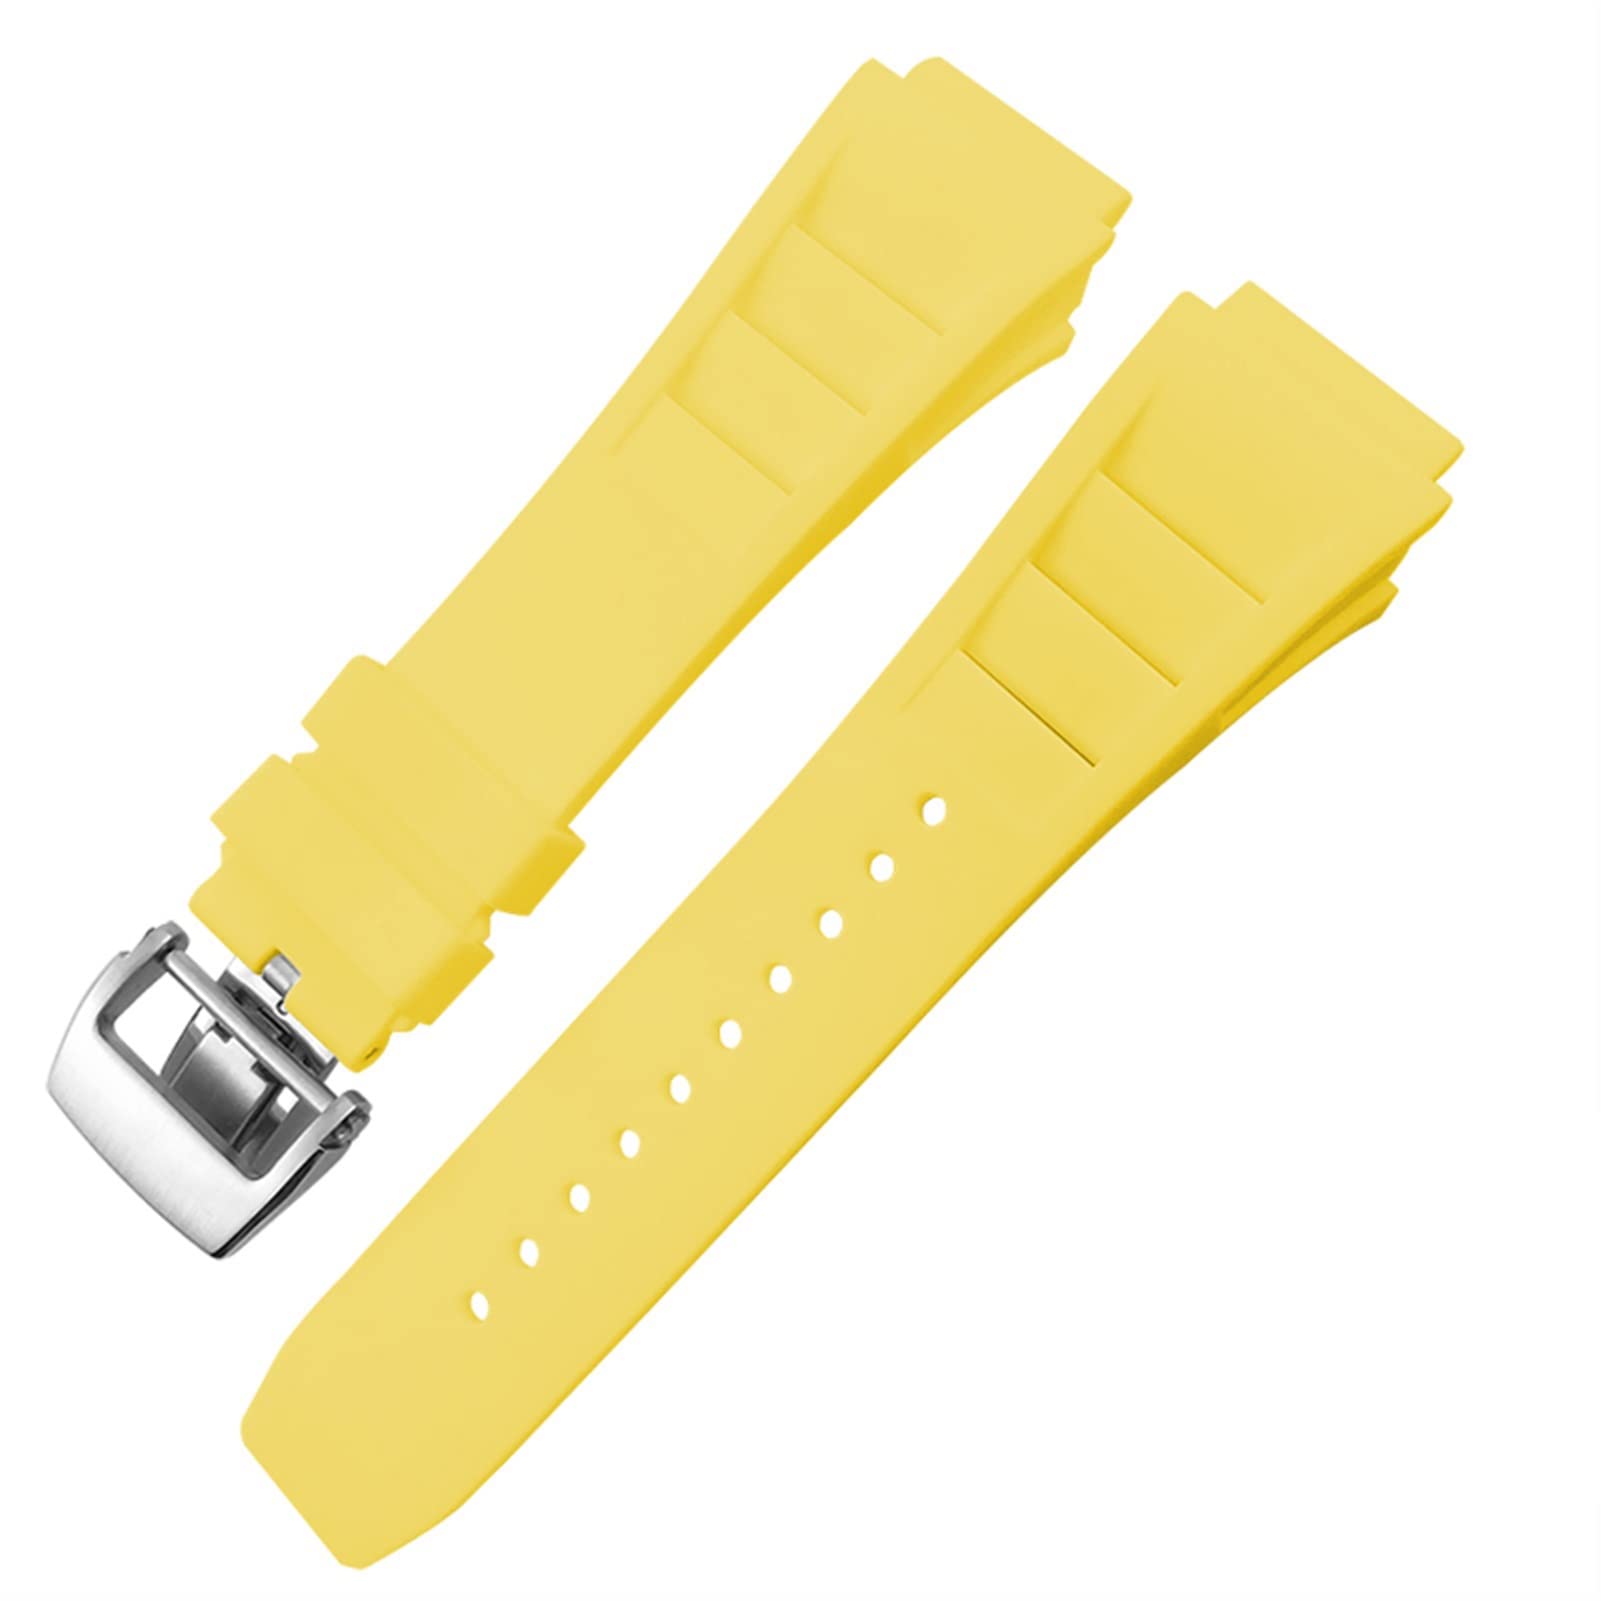 EEOMOiK Rubber Watchband 20x25mm Fit for Richard Spring Bar Silicone Mille Sport Watch Strap Soft Waterproof Wristband (Color : Yellow fold Buckle, Size : 20x25mm)